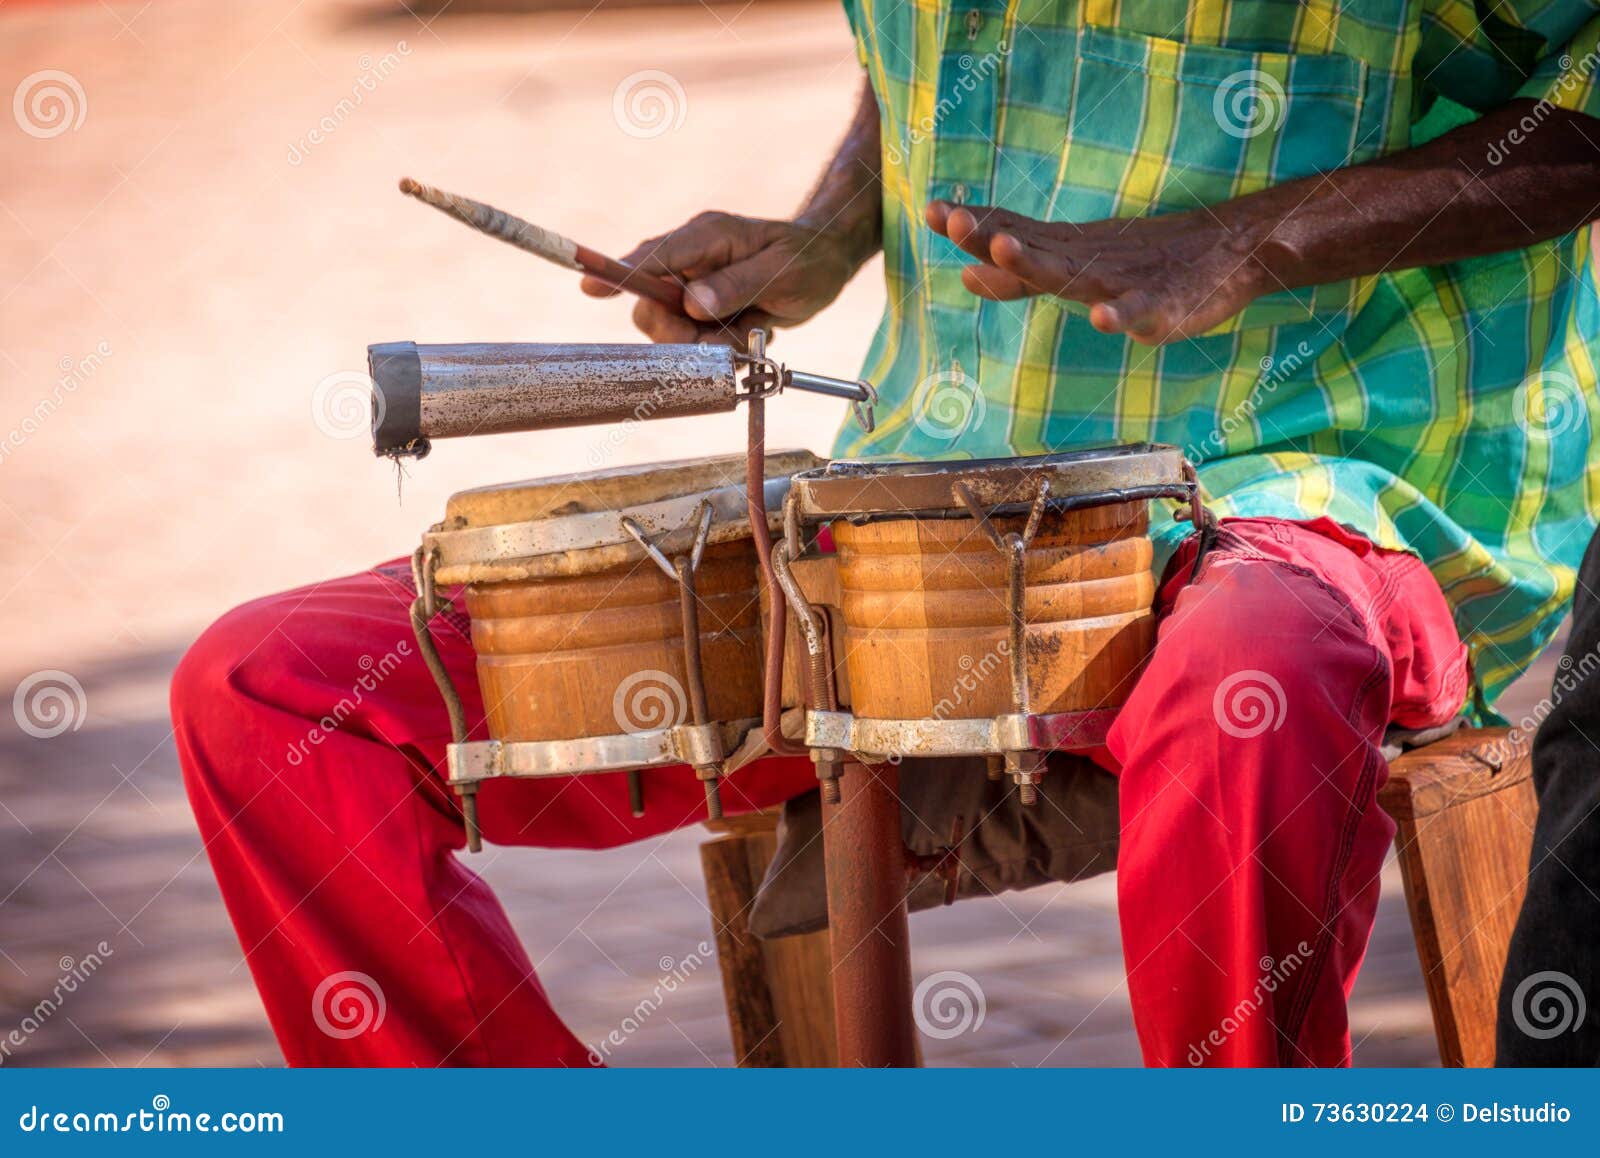 street musician playing drums in trinidad cuba